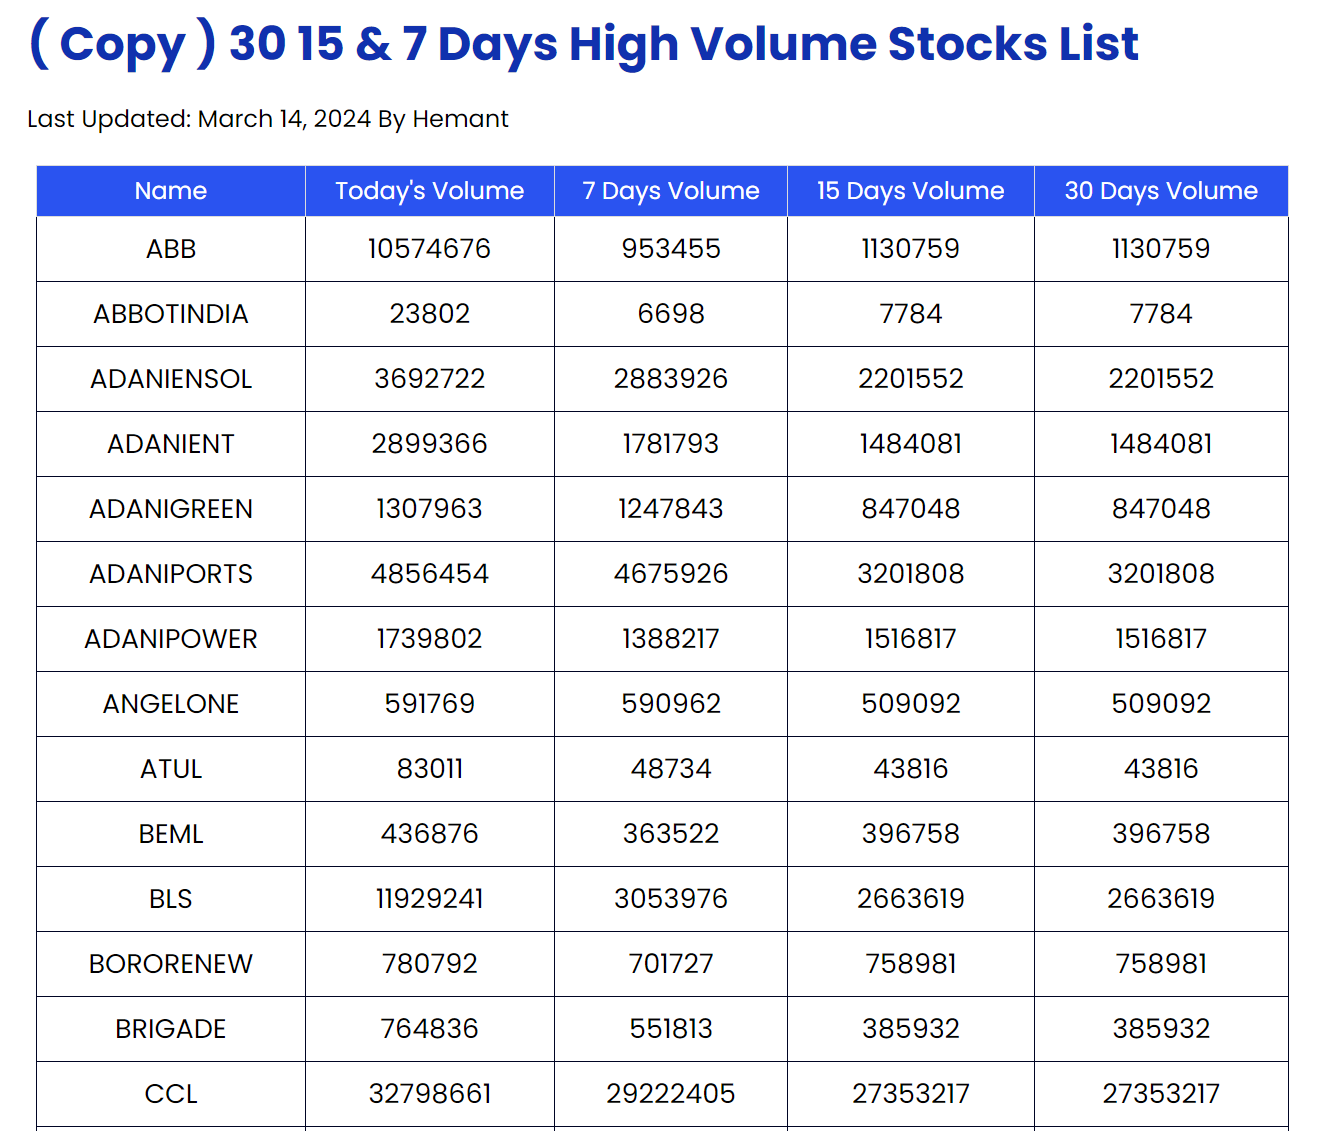 How To Find Stock That Has More Volume Than 30, 15 & 7 Days